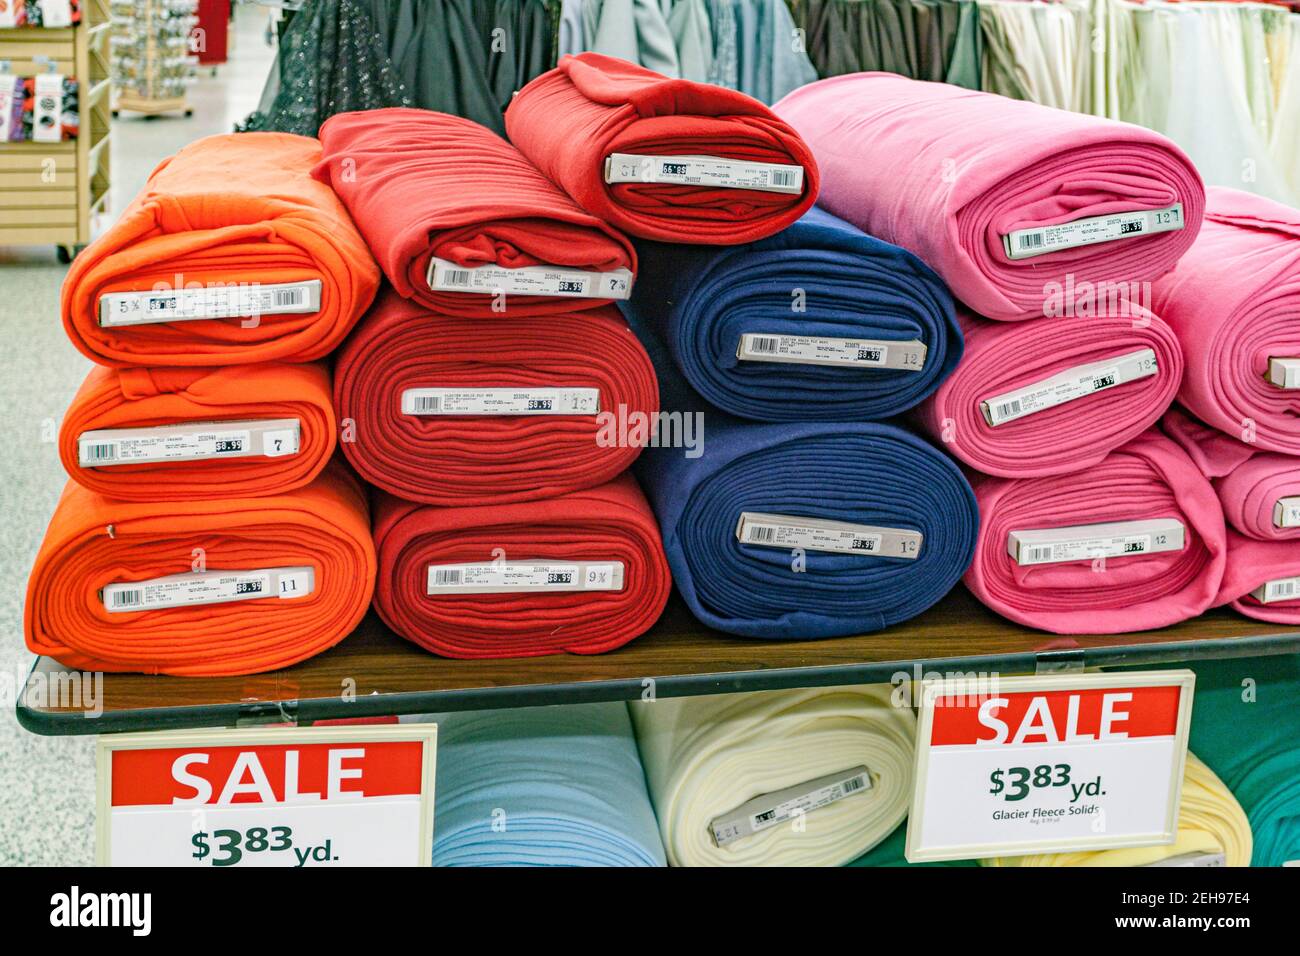 Colorful bolts of fleece fabric on sale in a retail store. Stock Photo